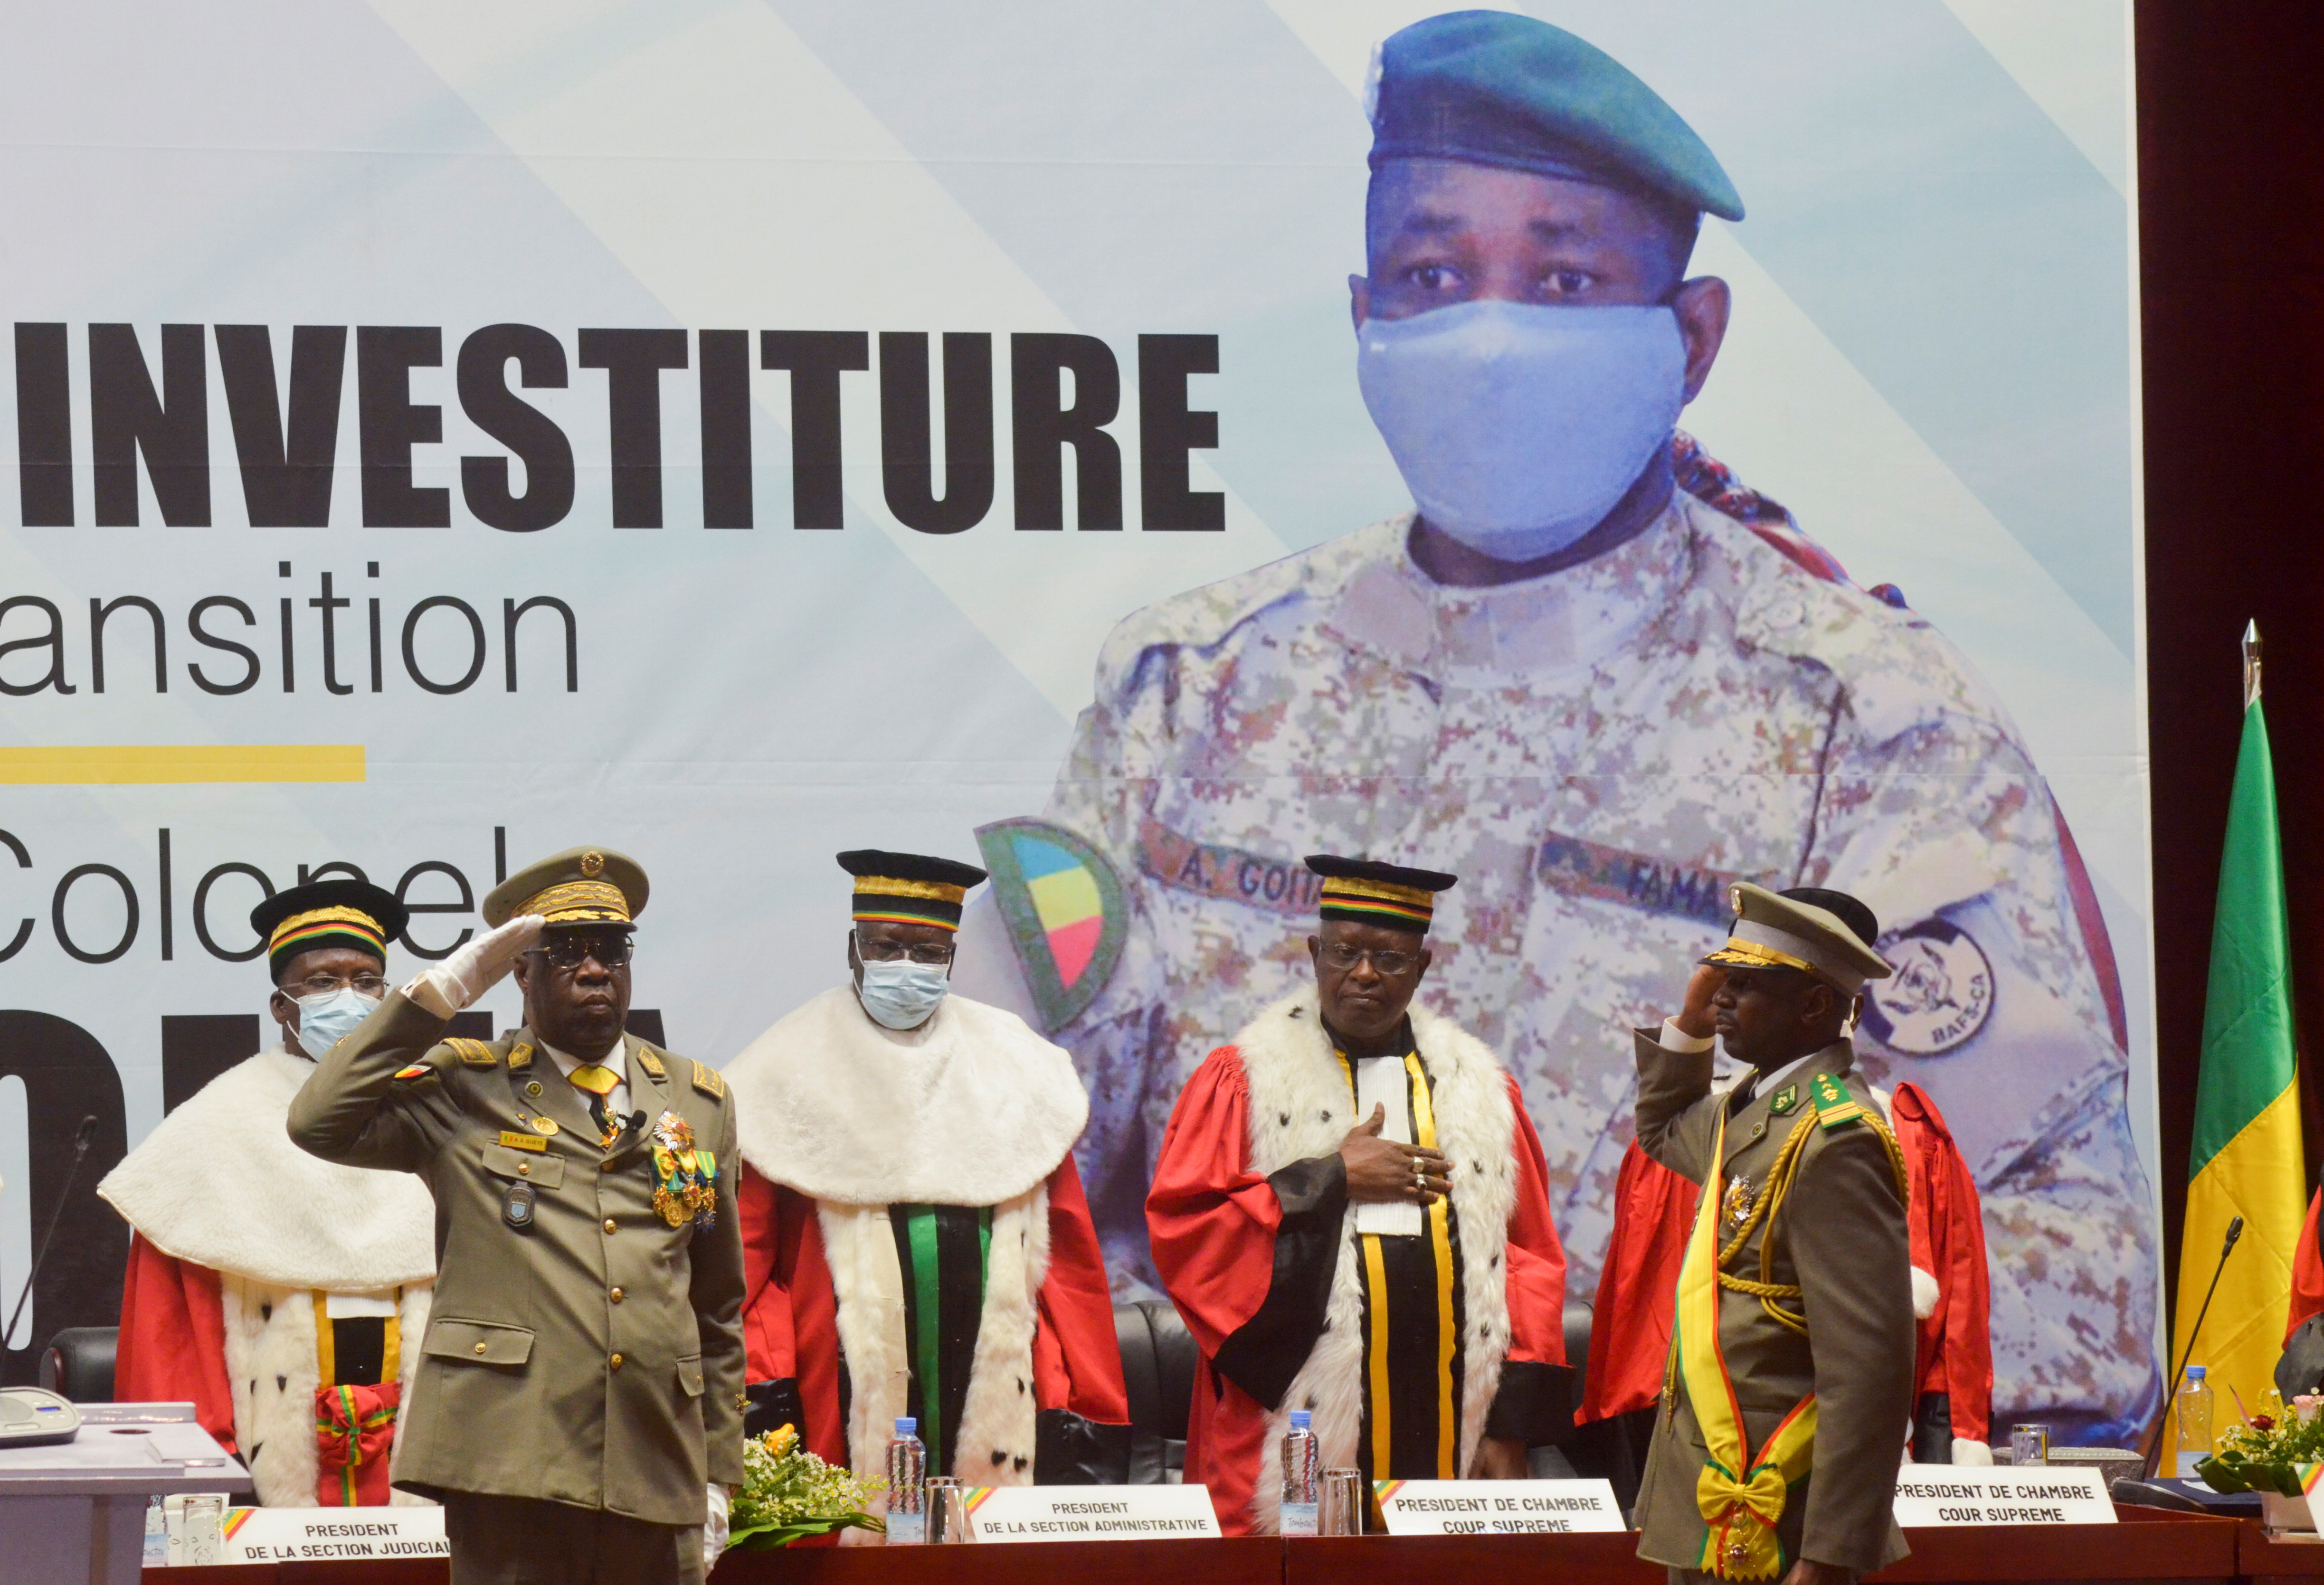 Colonel Assimi Goita, leader of two military coups and new interim president, stands during his inauguration ceremony in Bamako